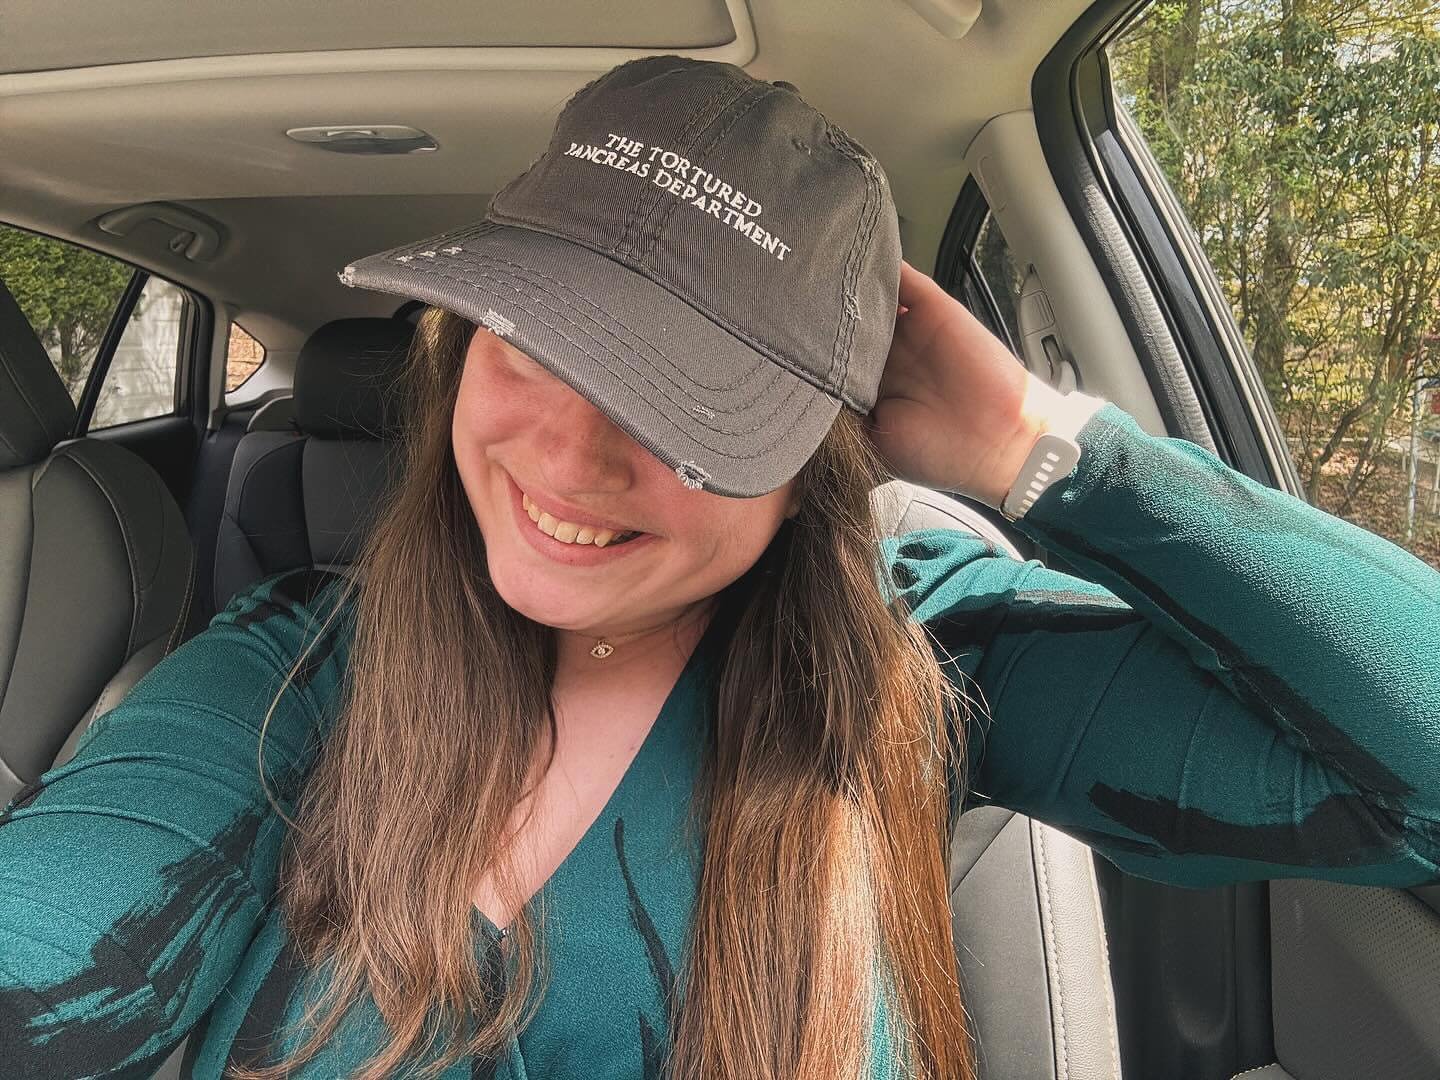 Our first Tortured Pancreas Department cap spotting!!! Congrats to @katierosemedia on rocking 13!! years living with type 1 diabetes! The perfect cap for #13 . ✨🫶✨ available now in our shop- linked in bio 🫶✨
.
.
.
.
.
.
#diabetestypeone #girlswithg